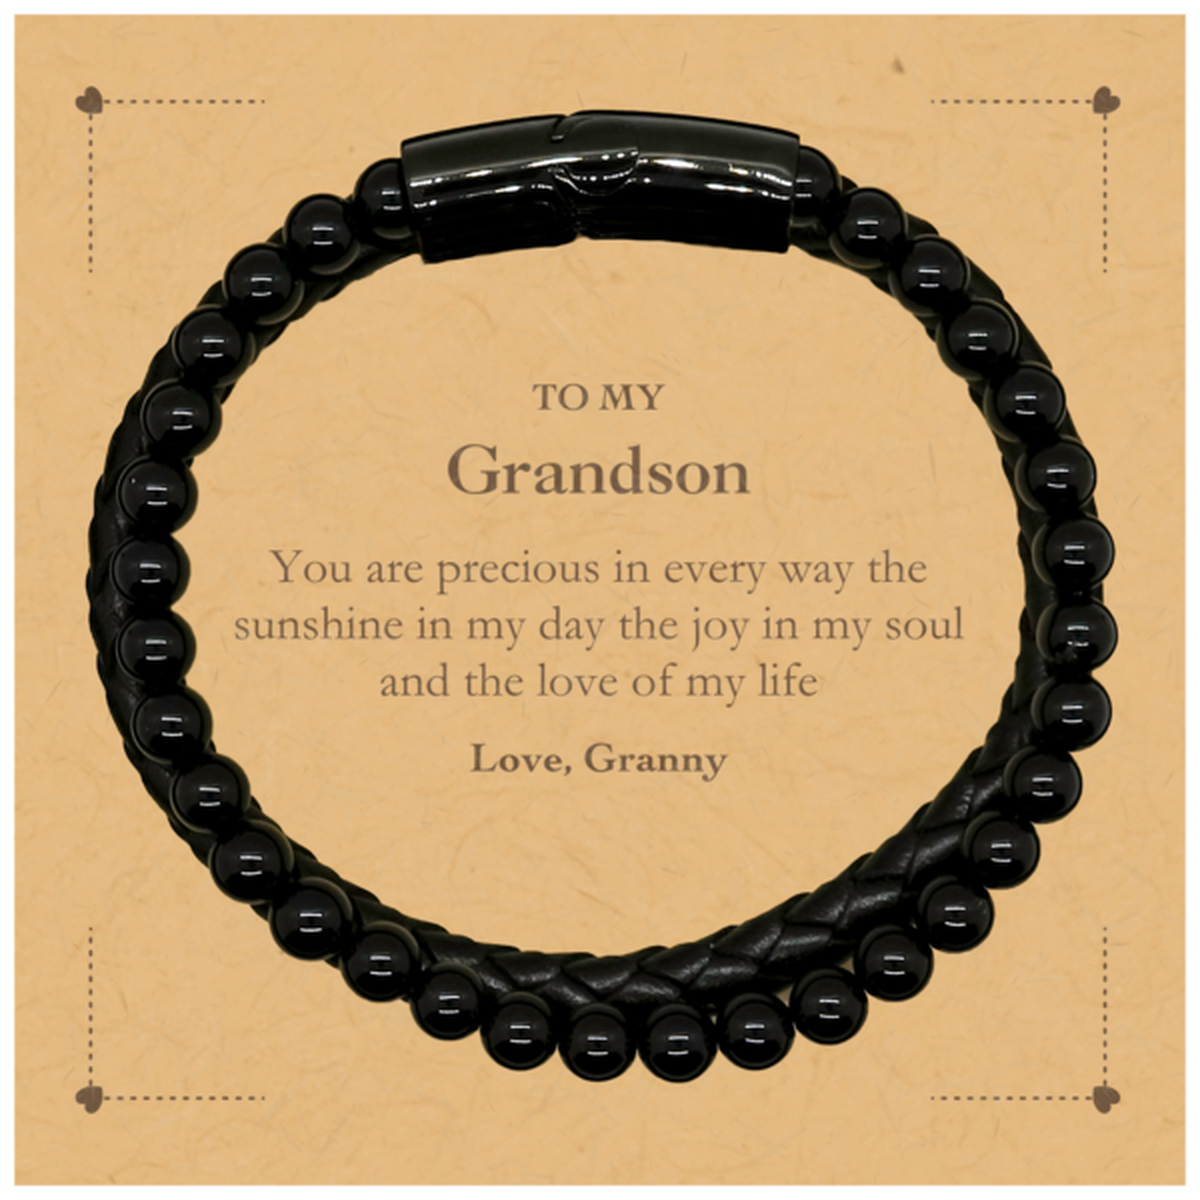 Graduation Gifts for Grandson Stone Leather Bracelets Present from Granny, Christmas Grandson Birthday Gifts Grandson You are precious in every way the sunshine in my day. Love, Granny